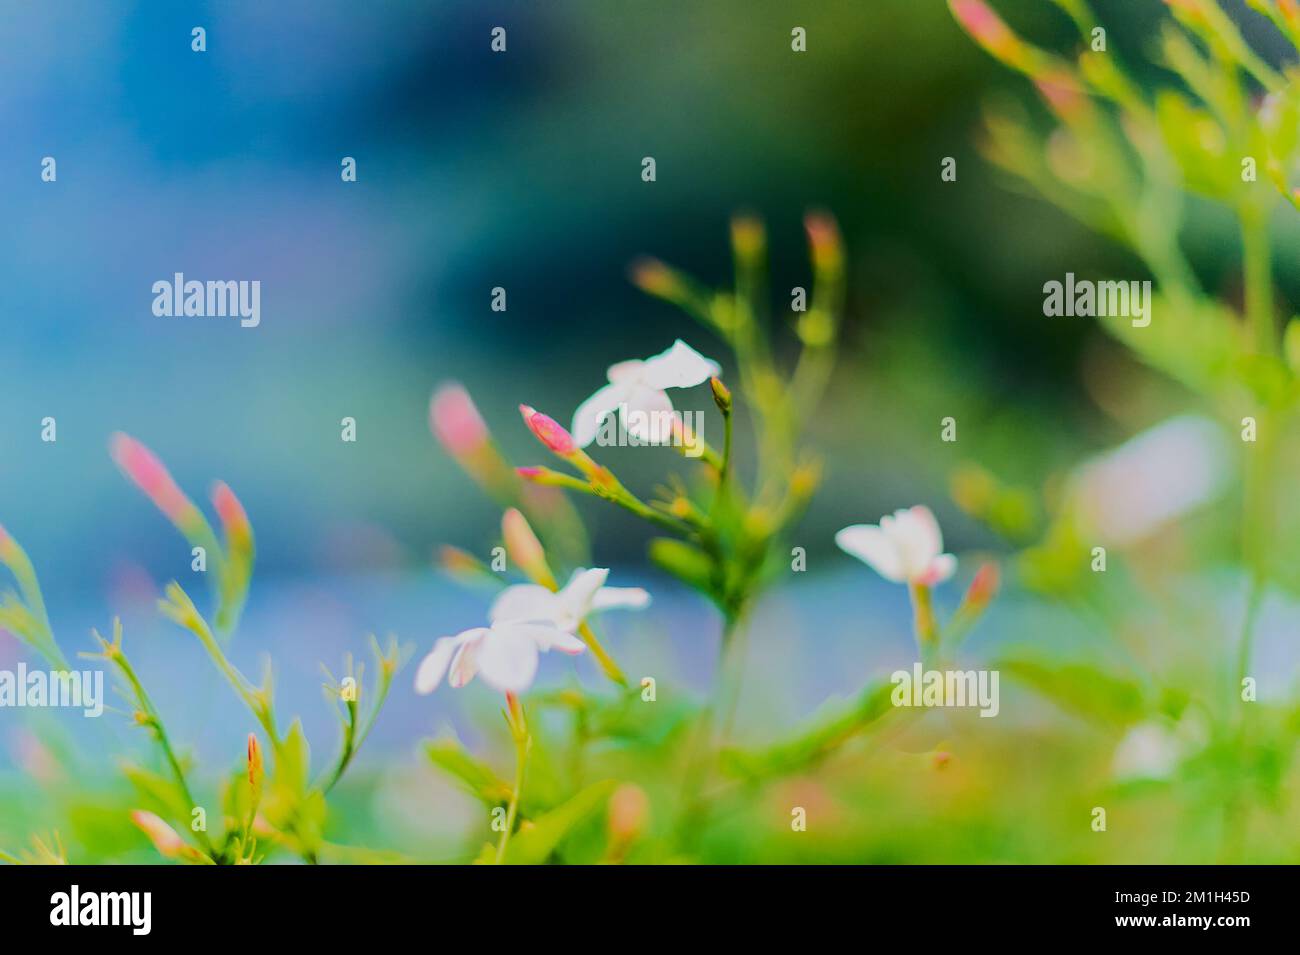 Out of focus background of jasmine with mostly blue and green tones Stock Photo